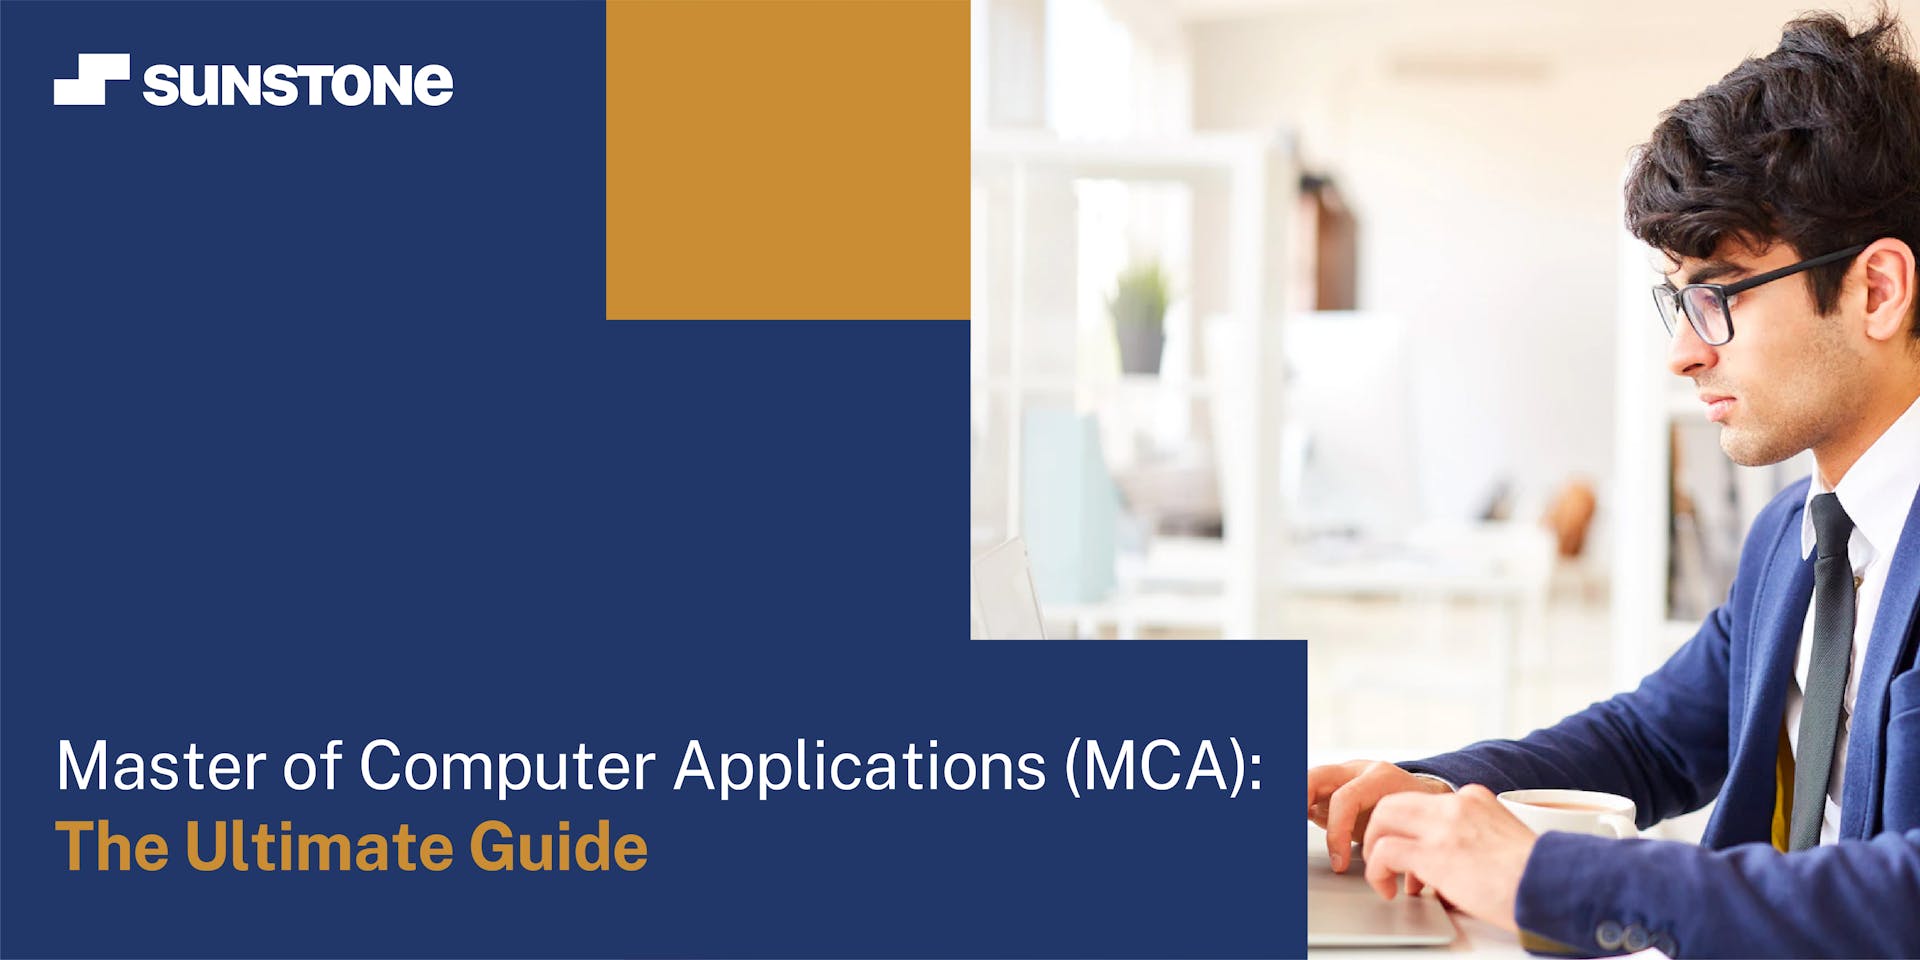 Master of Computer Applications (MCA): The Ultimate Guide